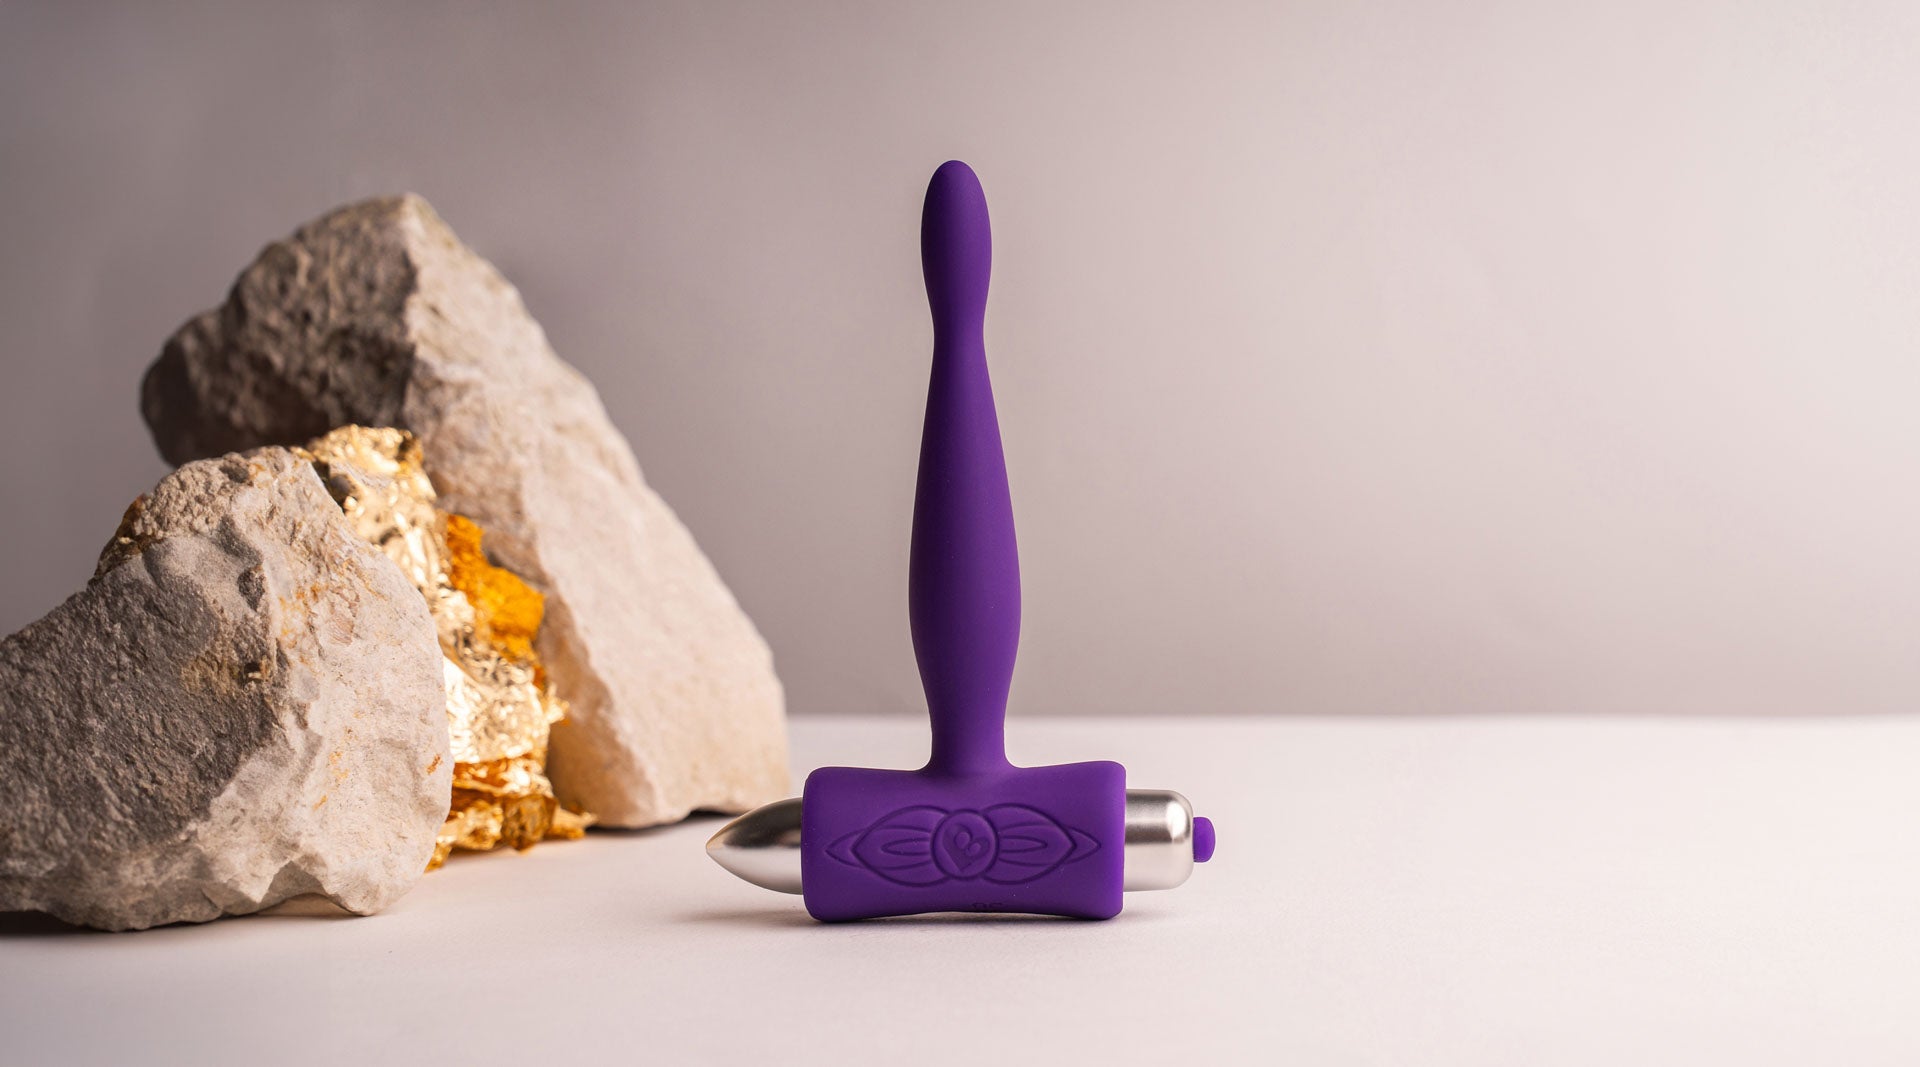 Super slim tipped silicone butt plug in purple housing a removable bullet vibrator.